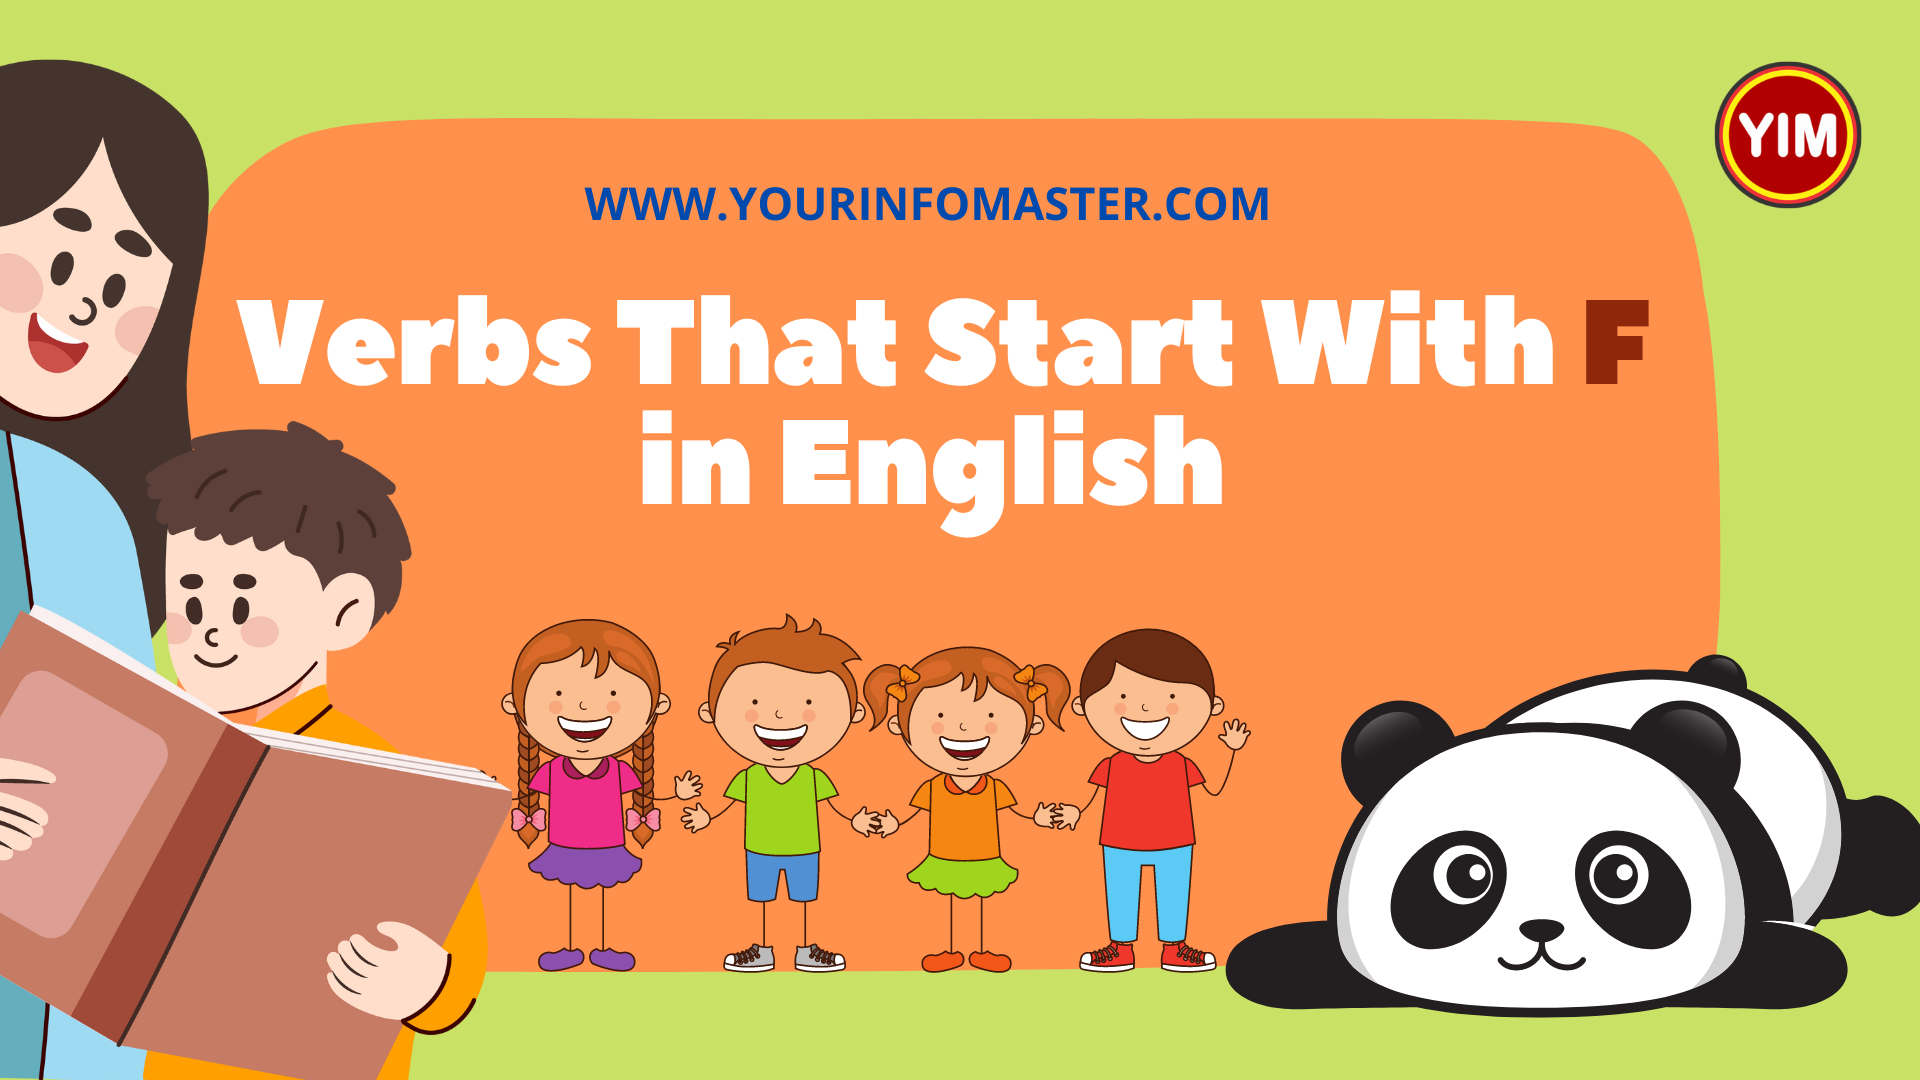 5 Letter Verbs, 5 Letter Verbs Starting With F, Action Words, Action Words That Start With F, English, English Grammar, English Vocabulary, English Words, F Action Words, F Verbs, F Verbs in English, List of Verbs That Start With F, Verbs List, Verbs That Start With F, Vocabulary, Words That Start with F